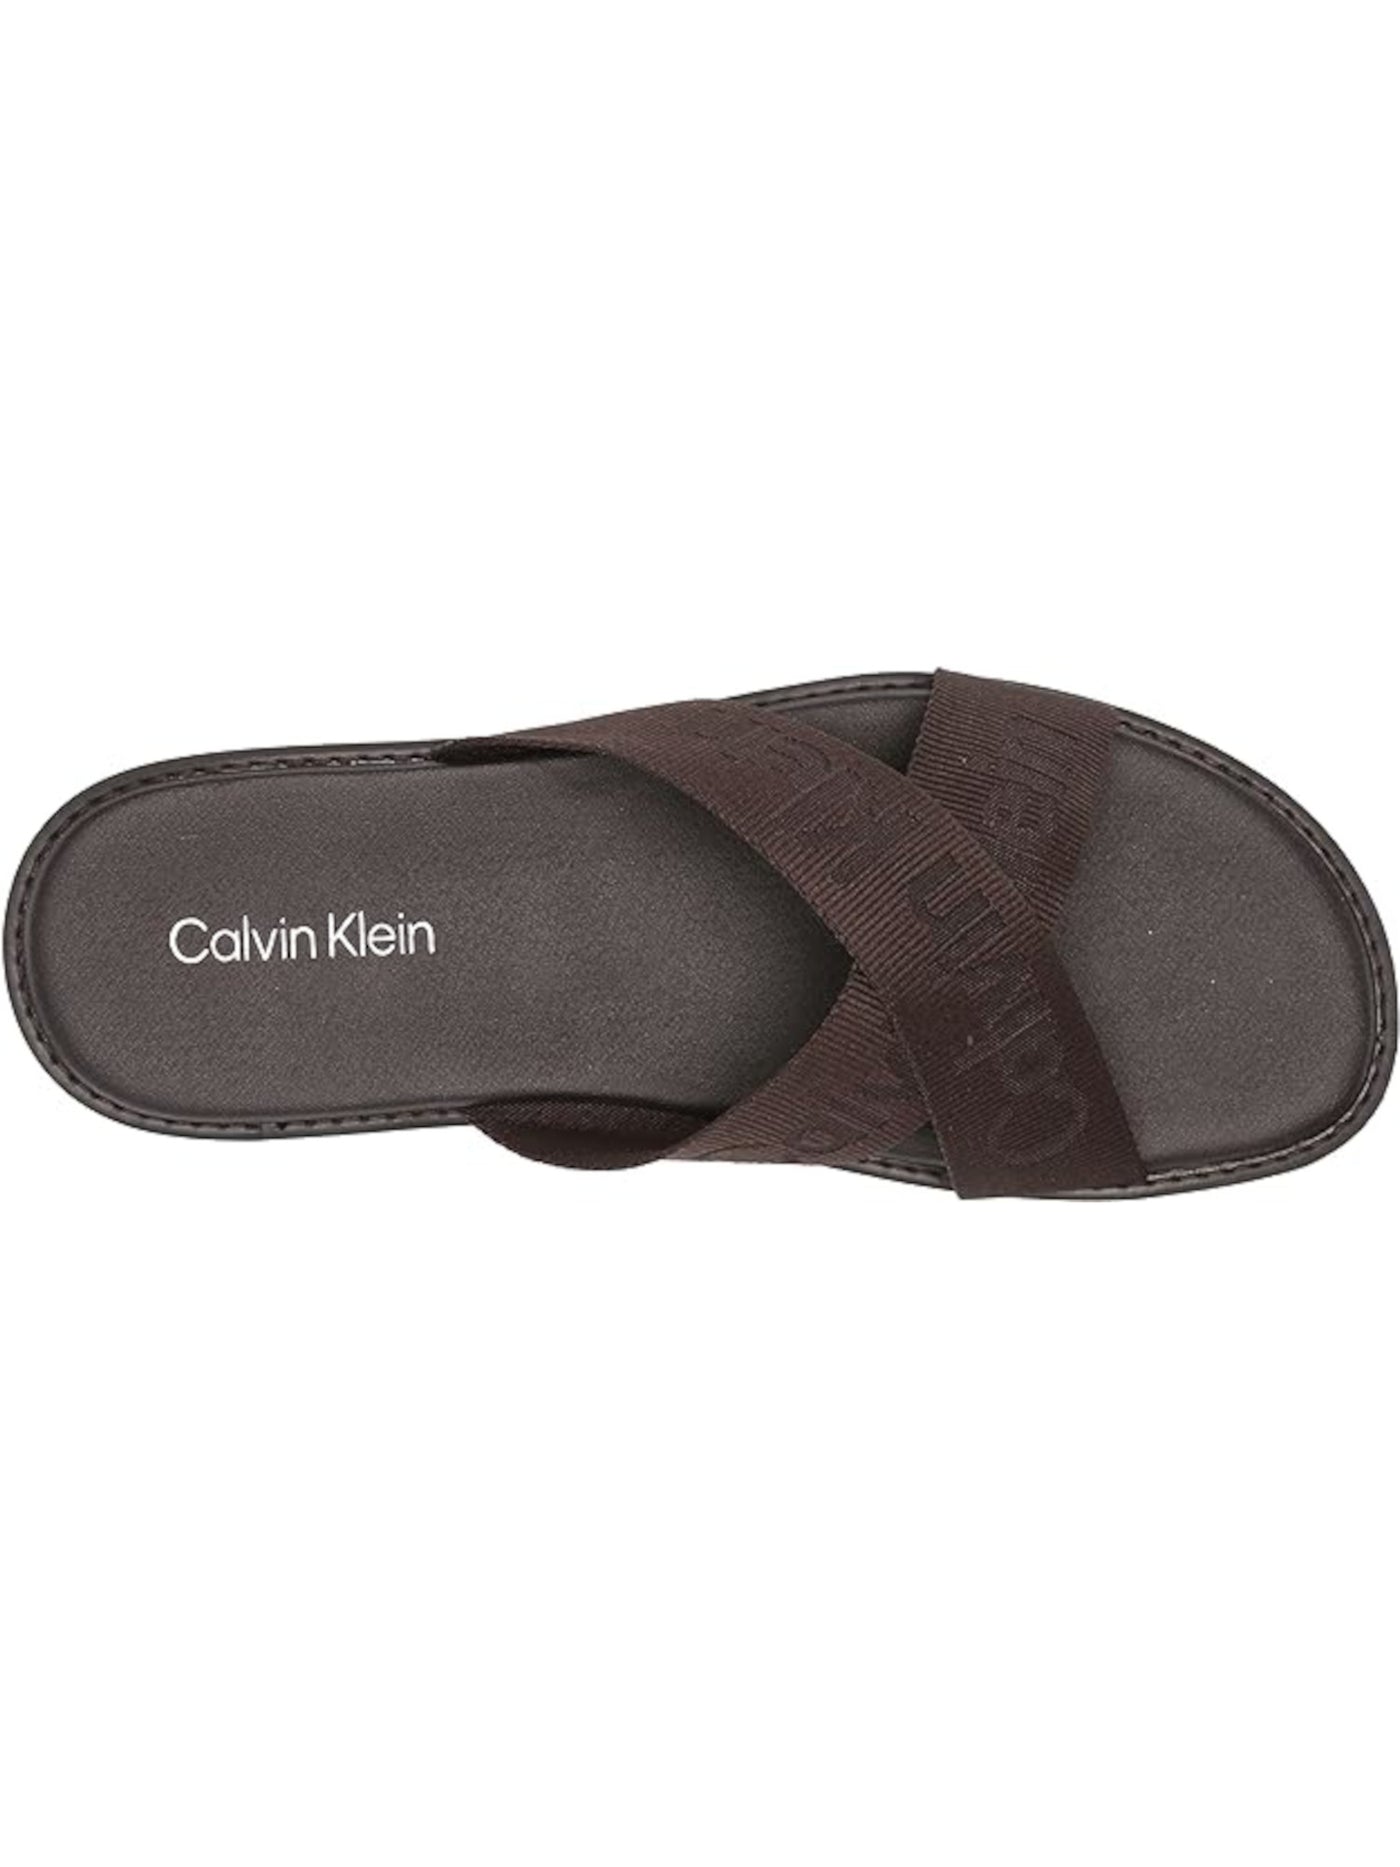 CALVIN KLEIN Mens Brown Mixed Media Cross Straps Padded Evano Round Toe Slide Sandals Shoes 7